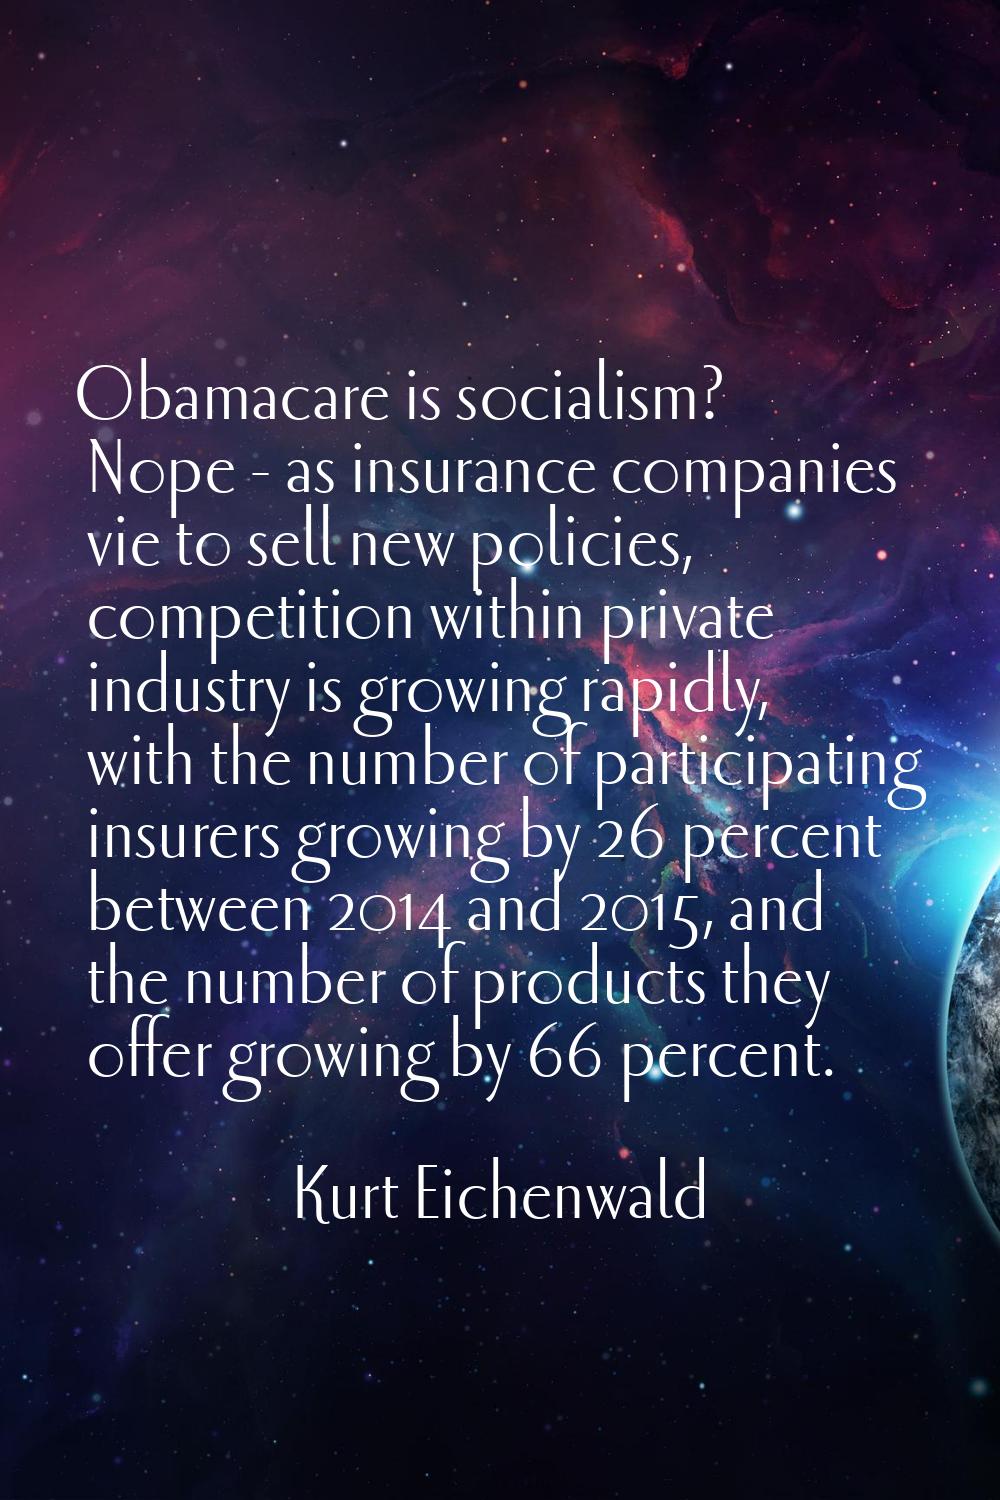 Obamacare is socialism? Nope - as insurance companies vie to sell new policies, competition within 